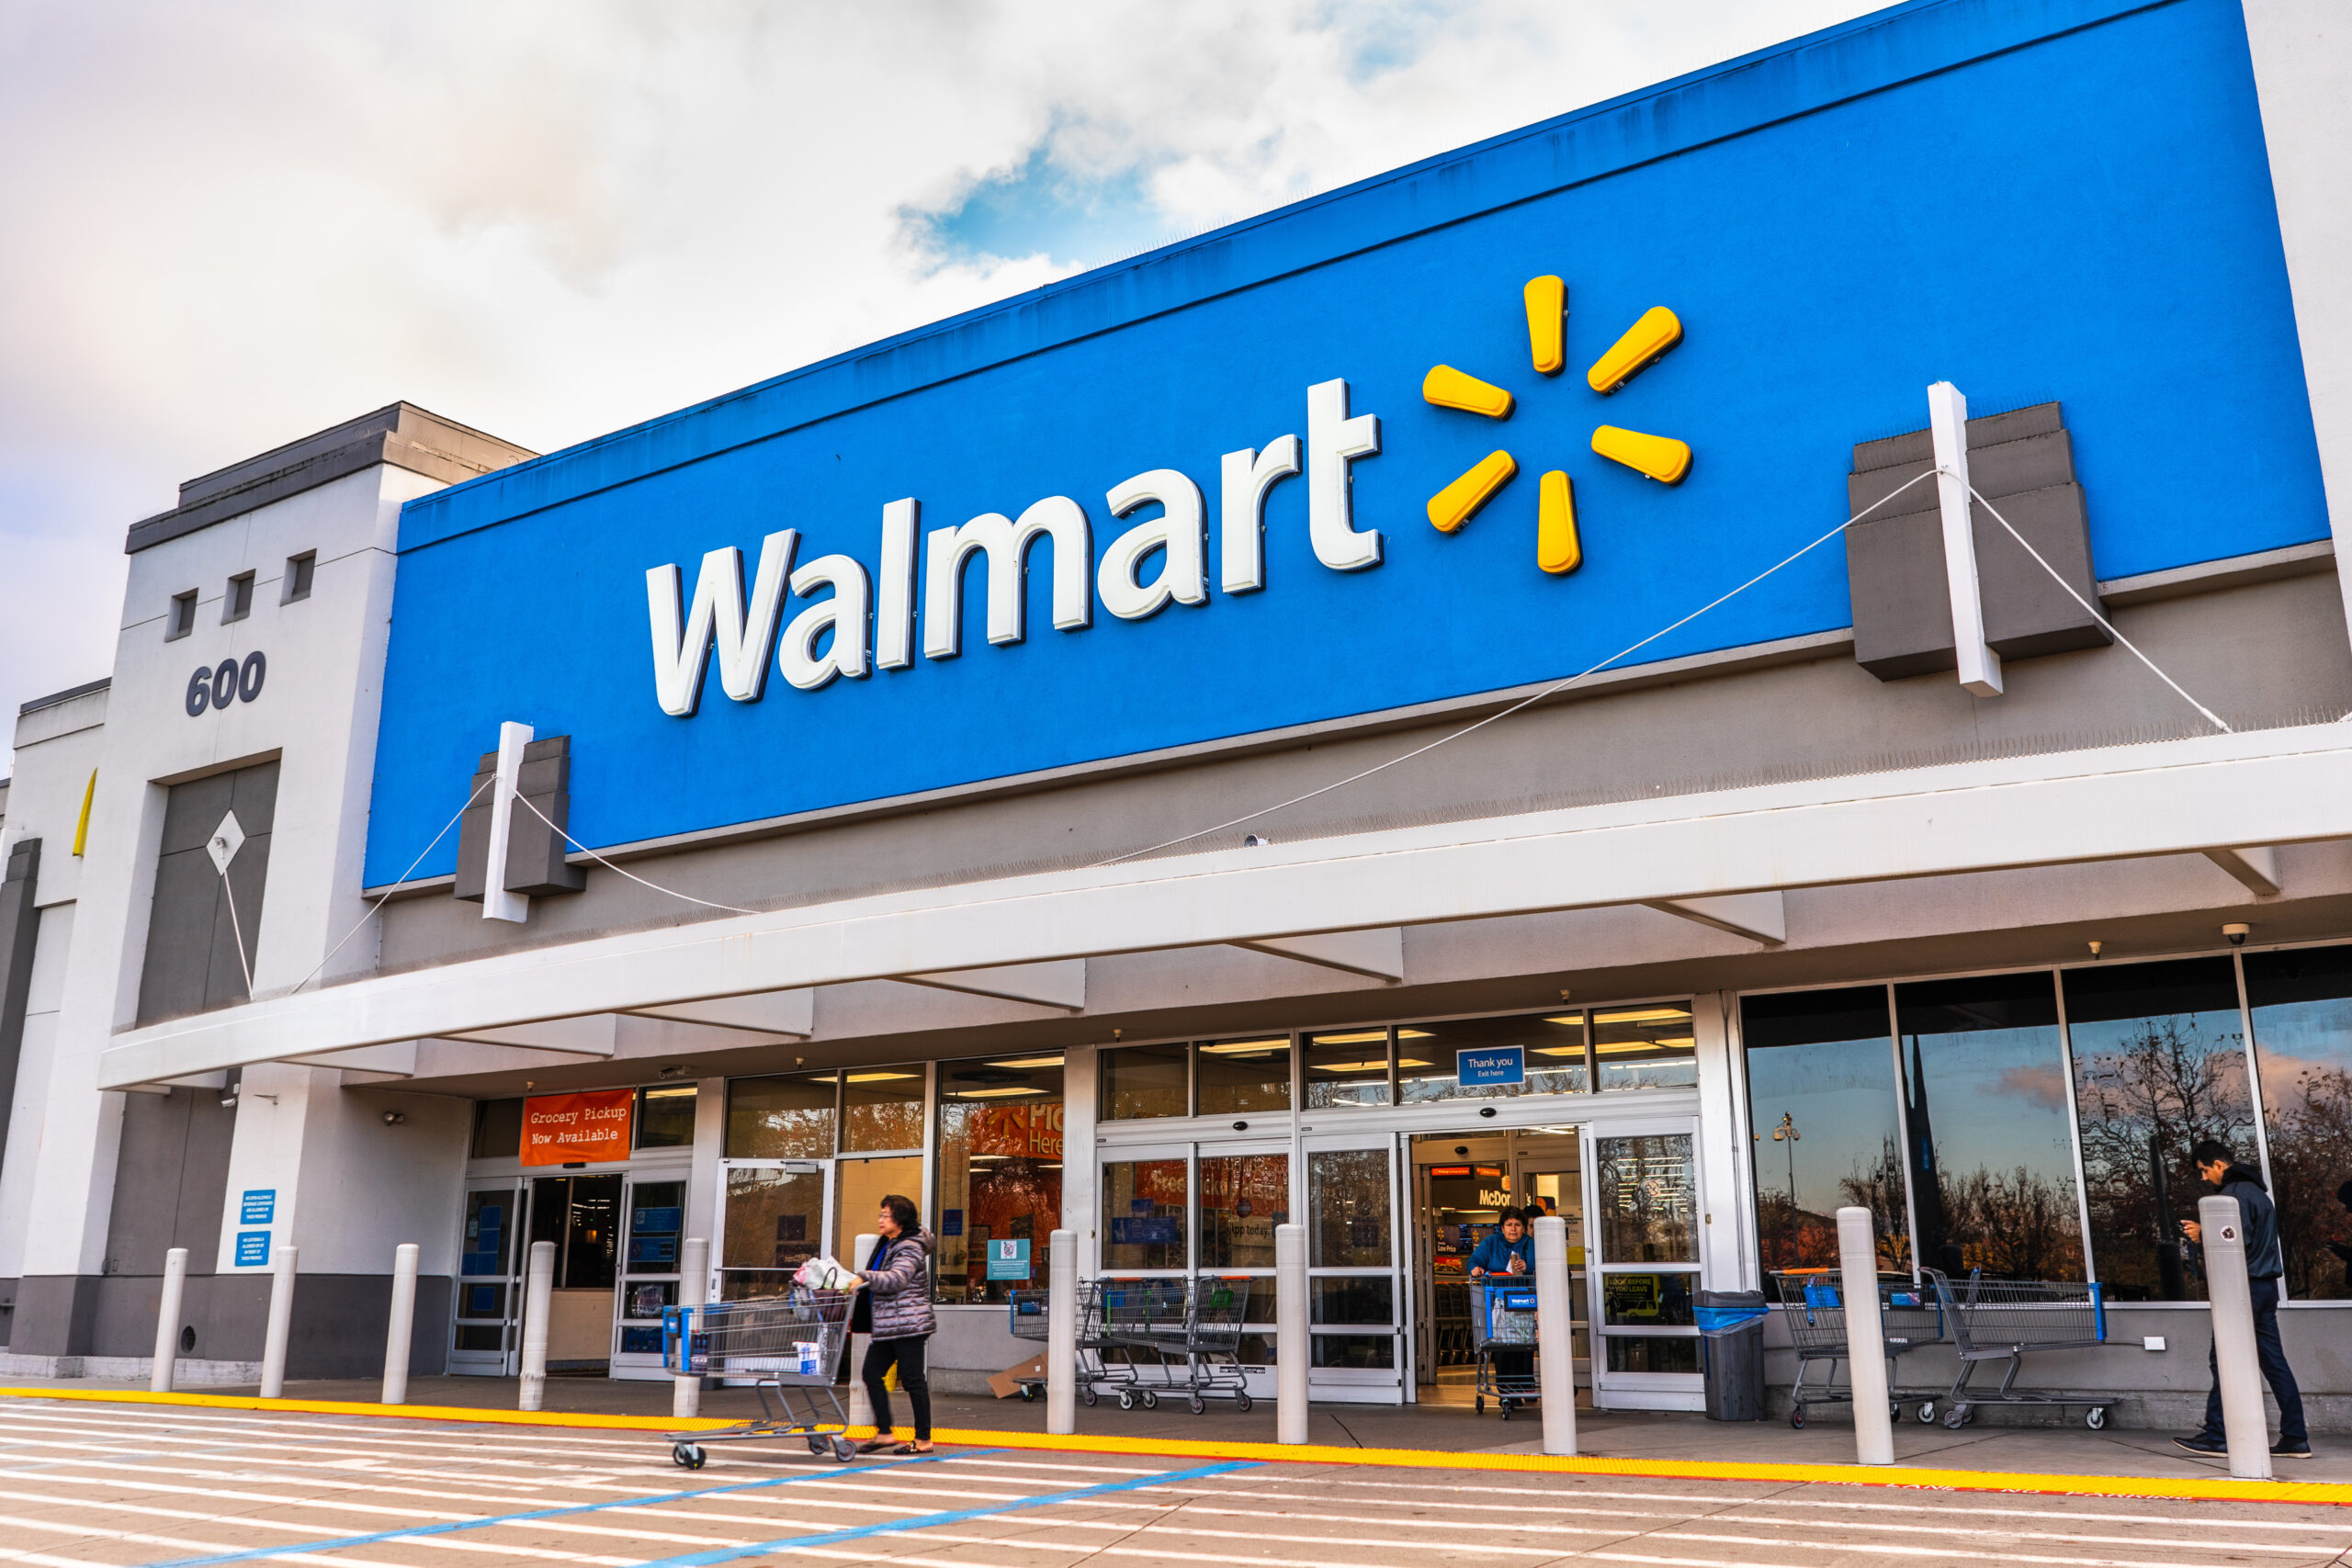 How to Sell on Walmart Marketplace in 3 Easy Steps